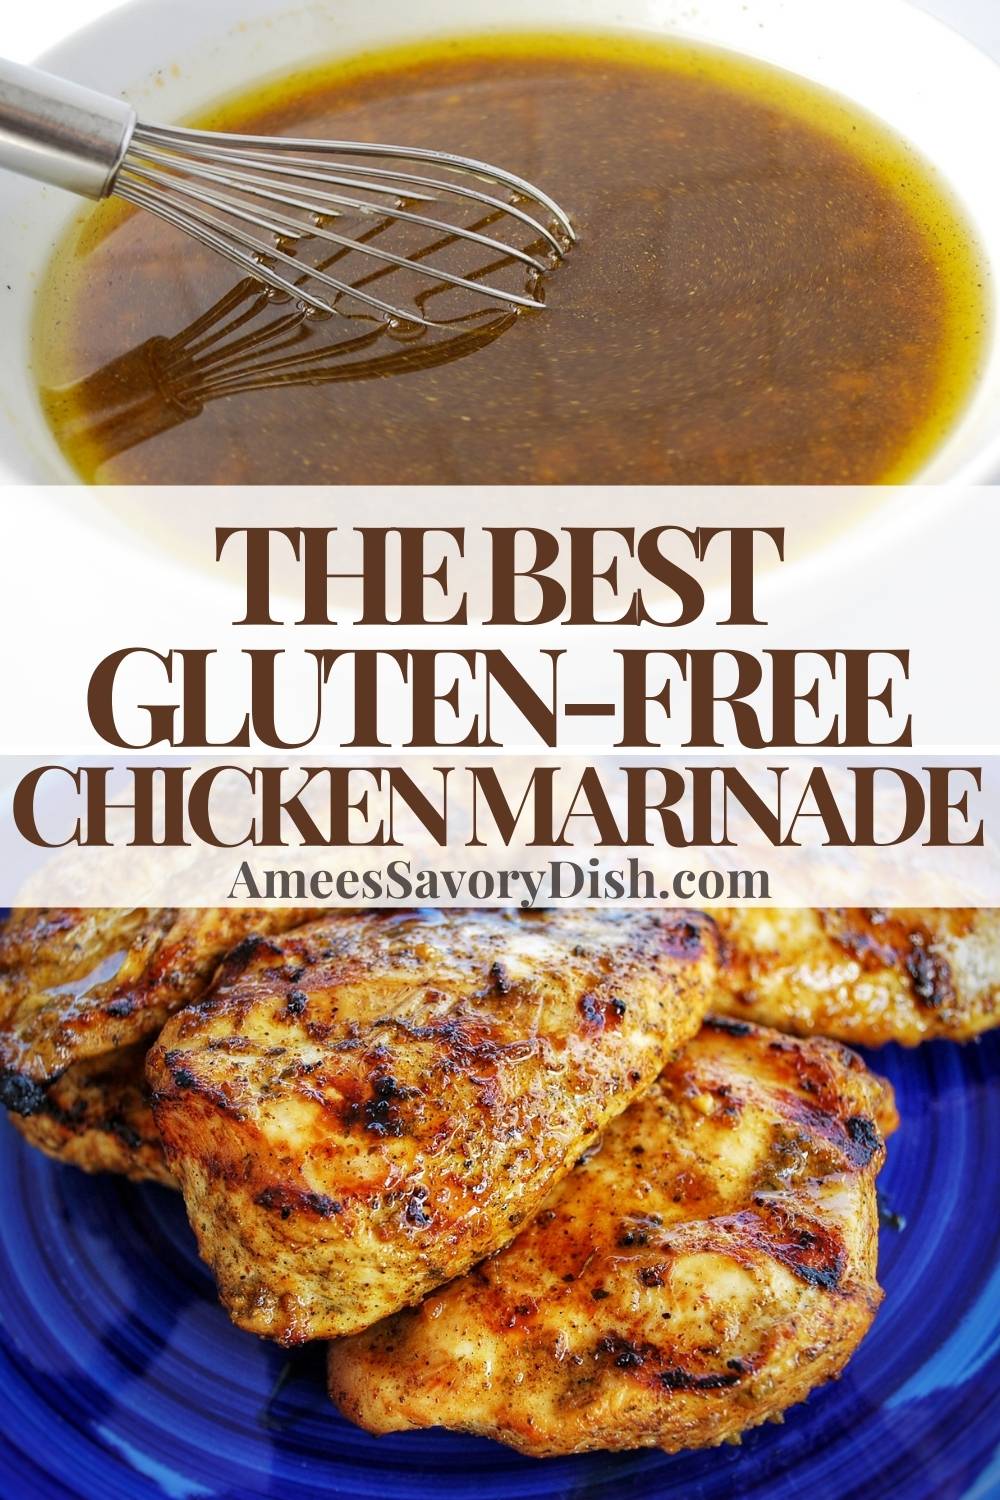 Level up your grilling game with this Gluten-free Chicken Marinade. Marinate any cut of chicken overnight in a flawless balance of savory, citrusy, salty, and spicy flavors. via @Ameessavorydish